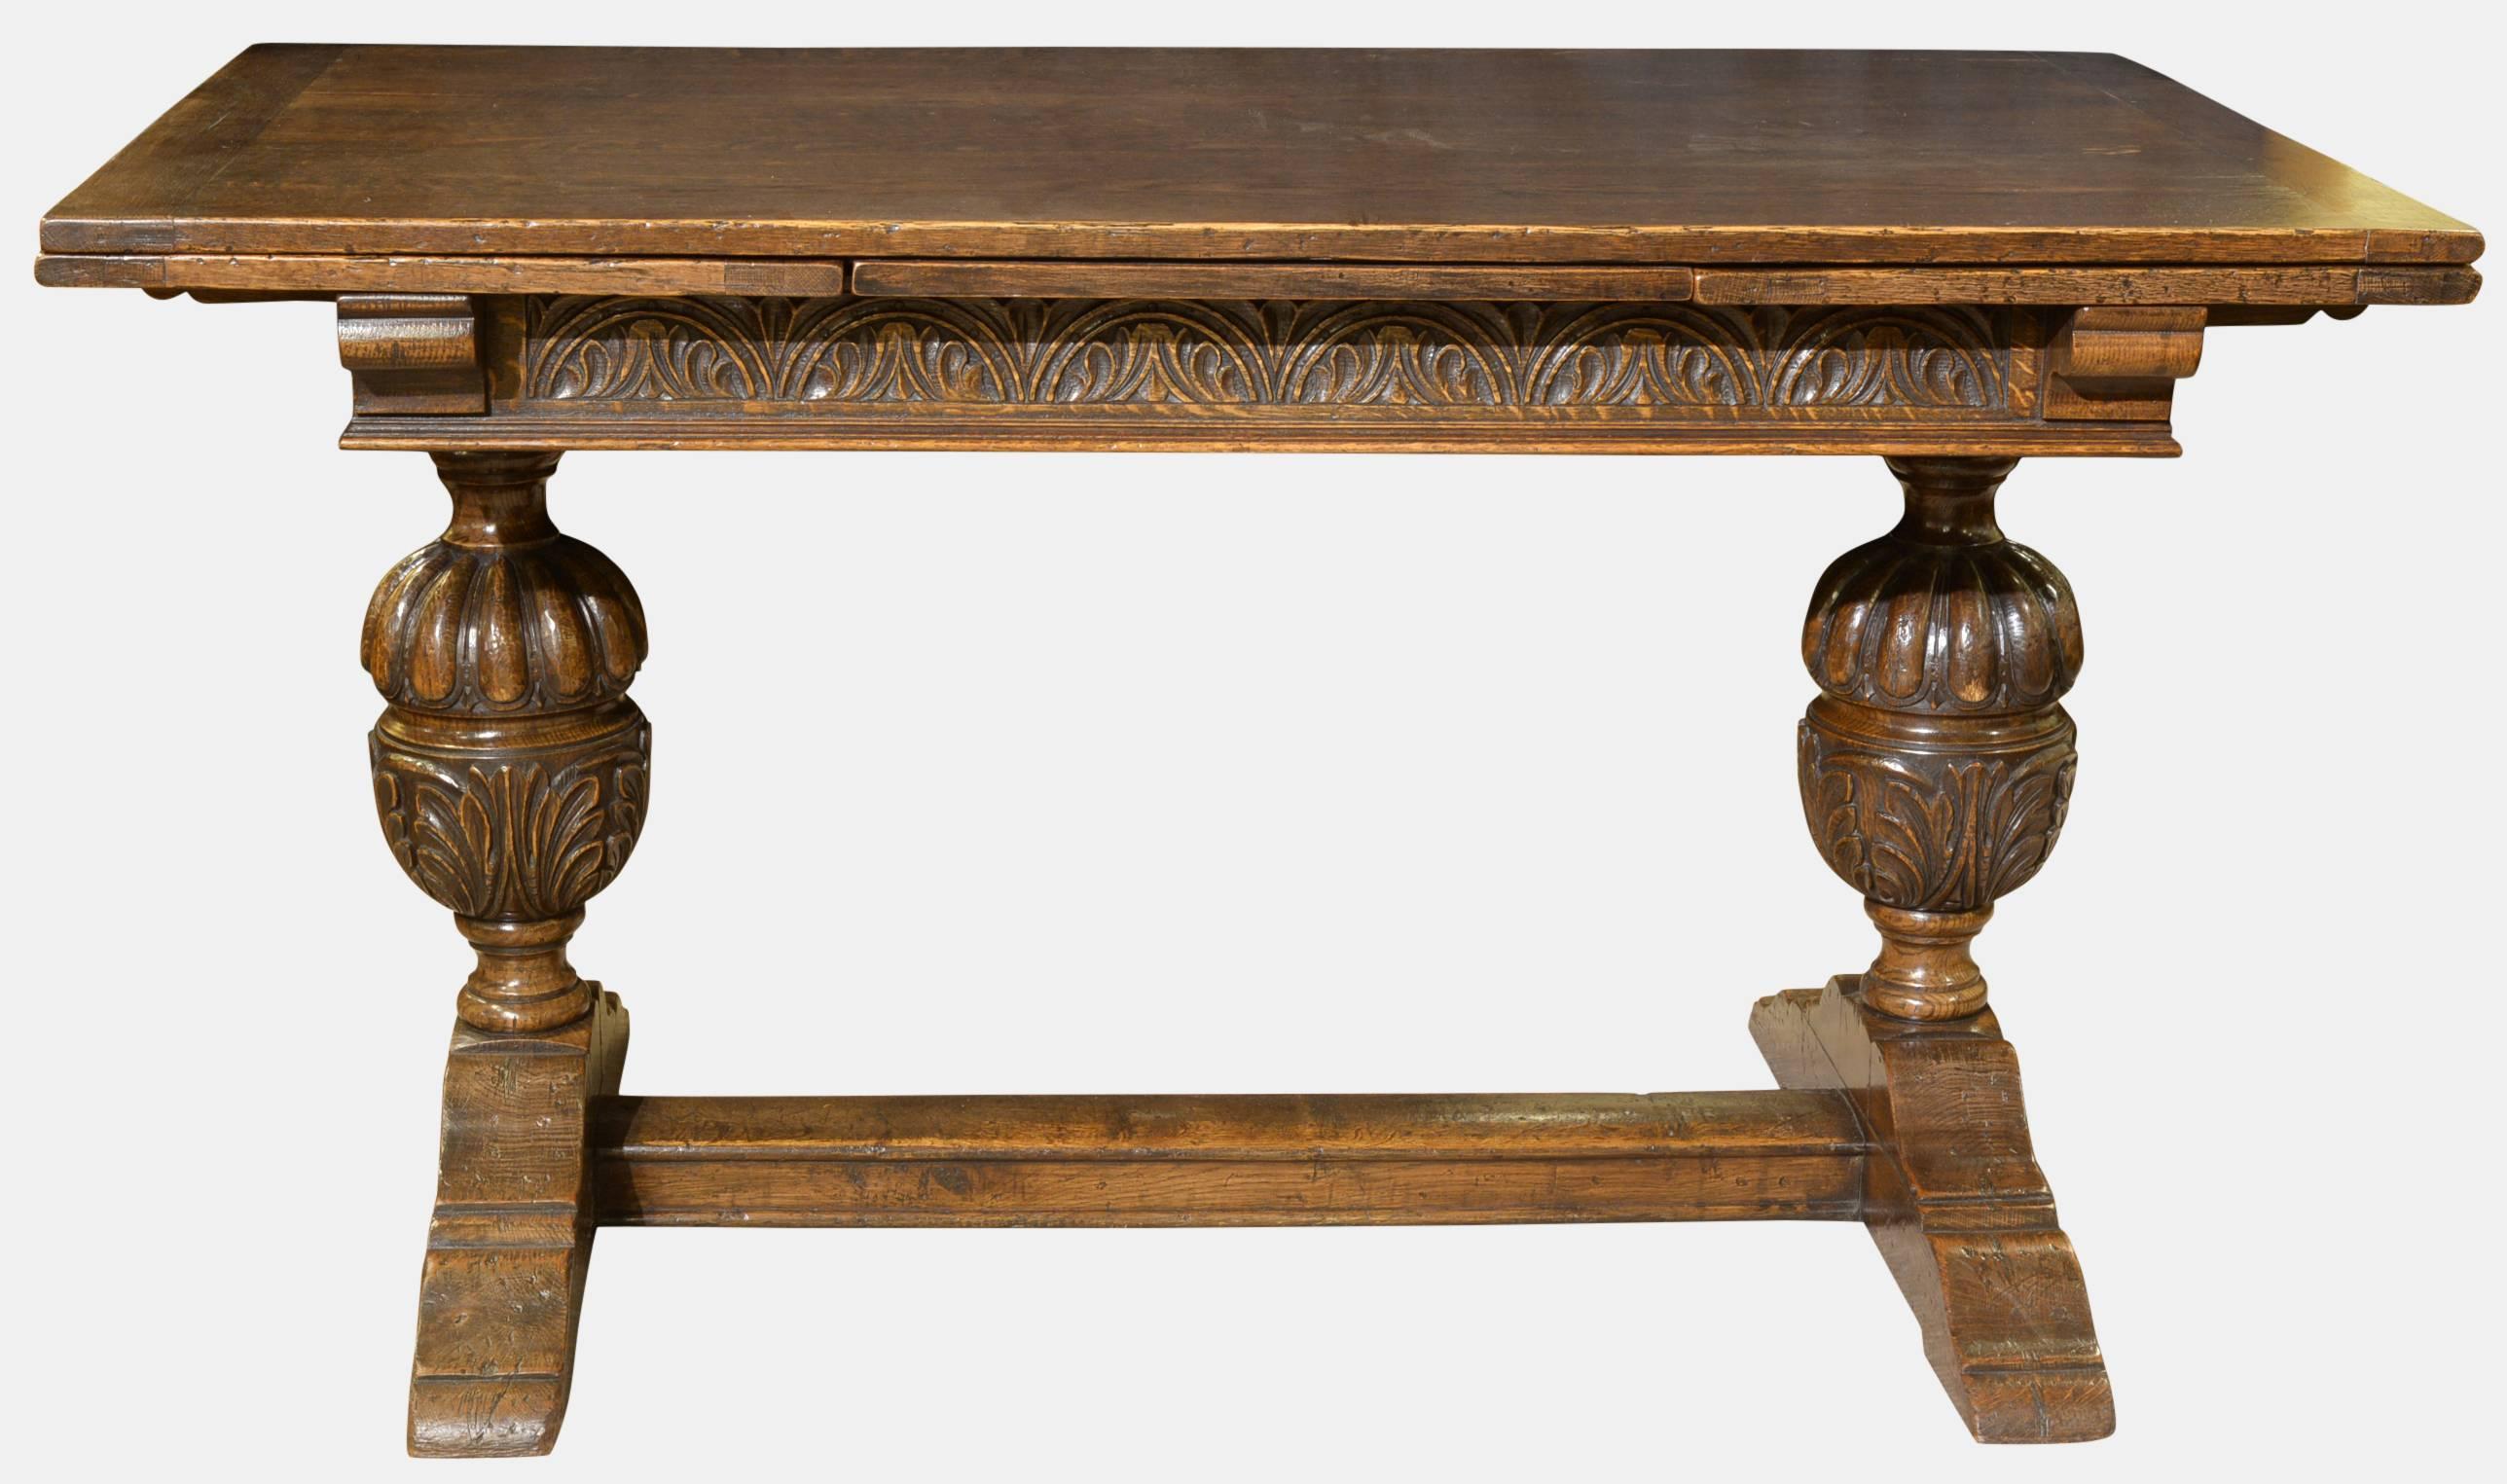 A very good carved oak draw leaf table in the Elizabethan style, with cup and cover end supports,

circa 1900.